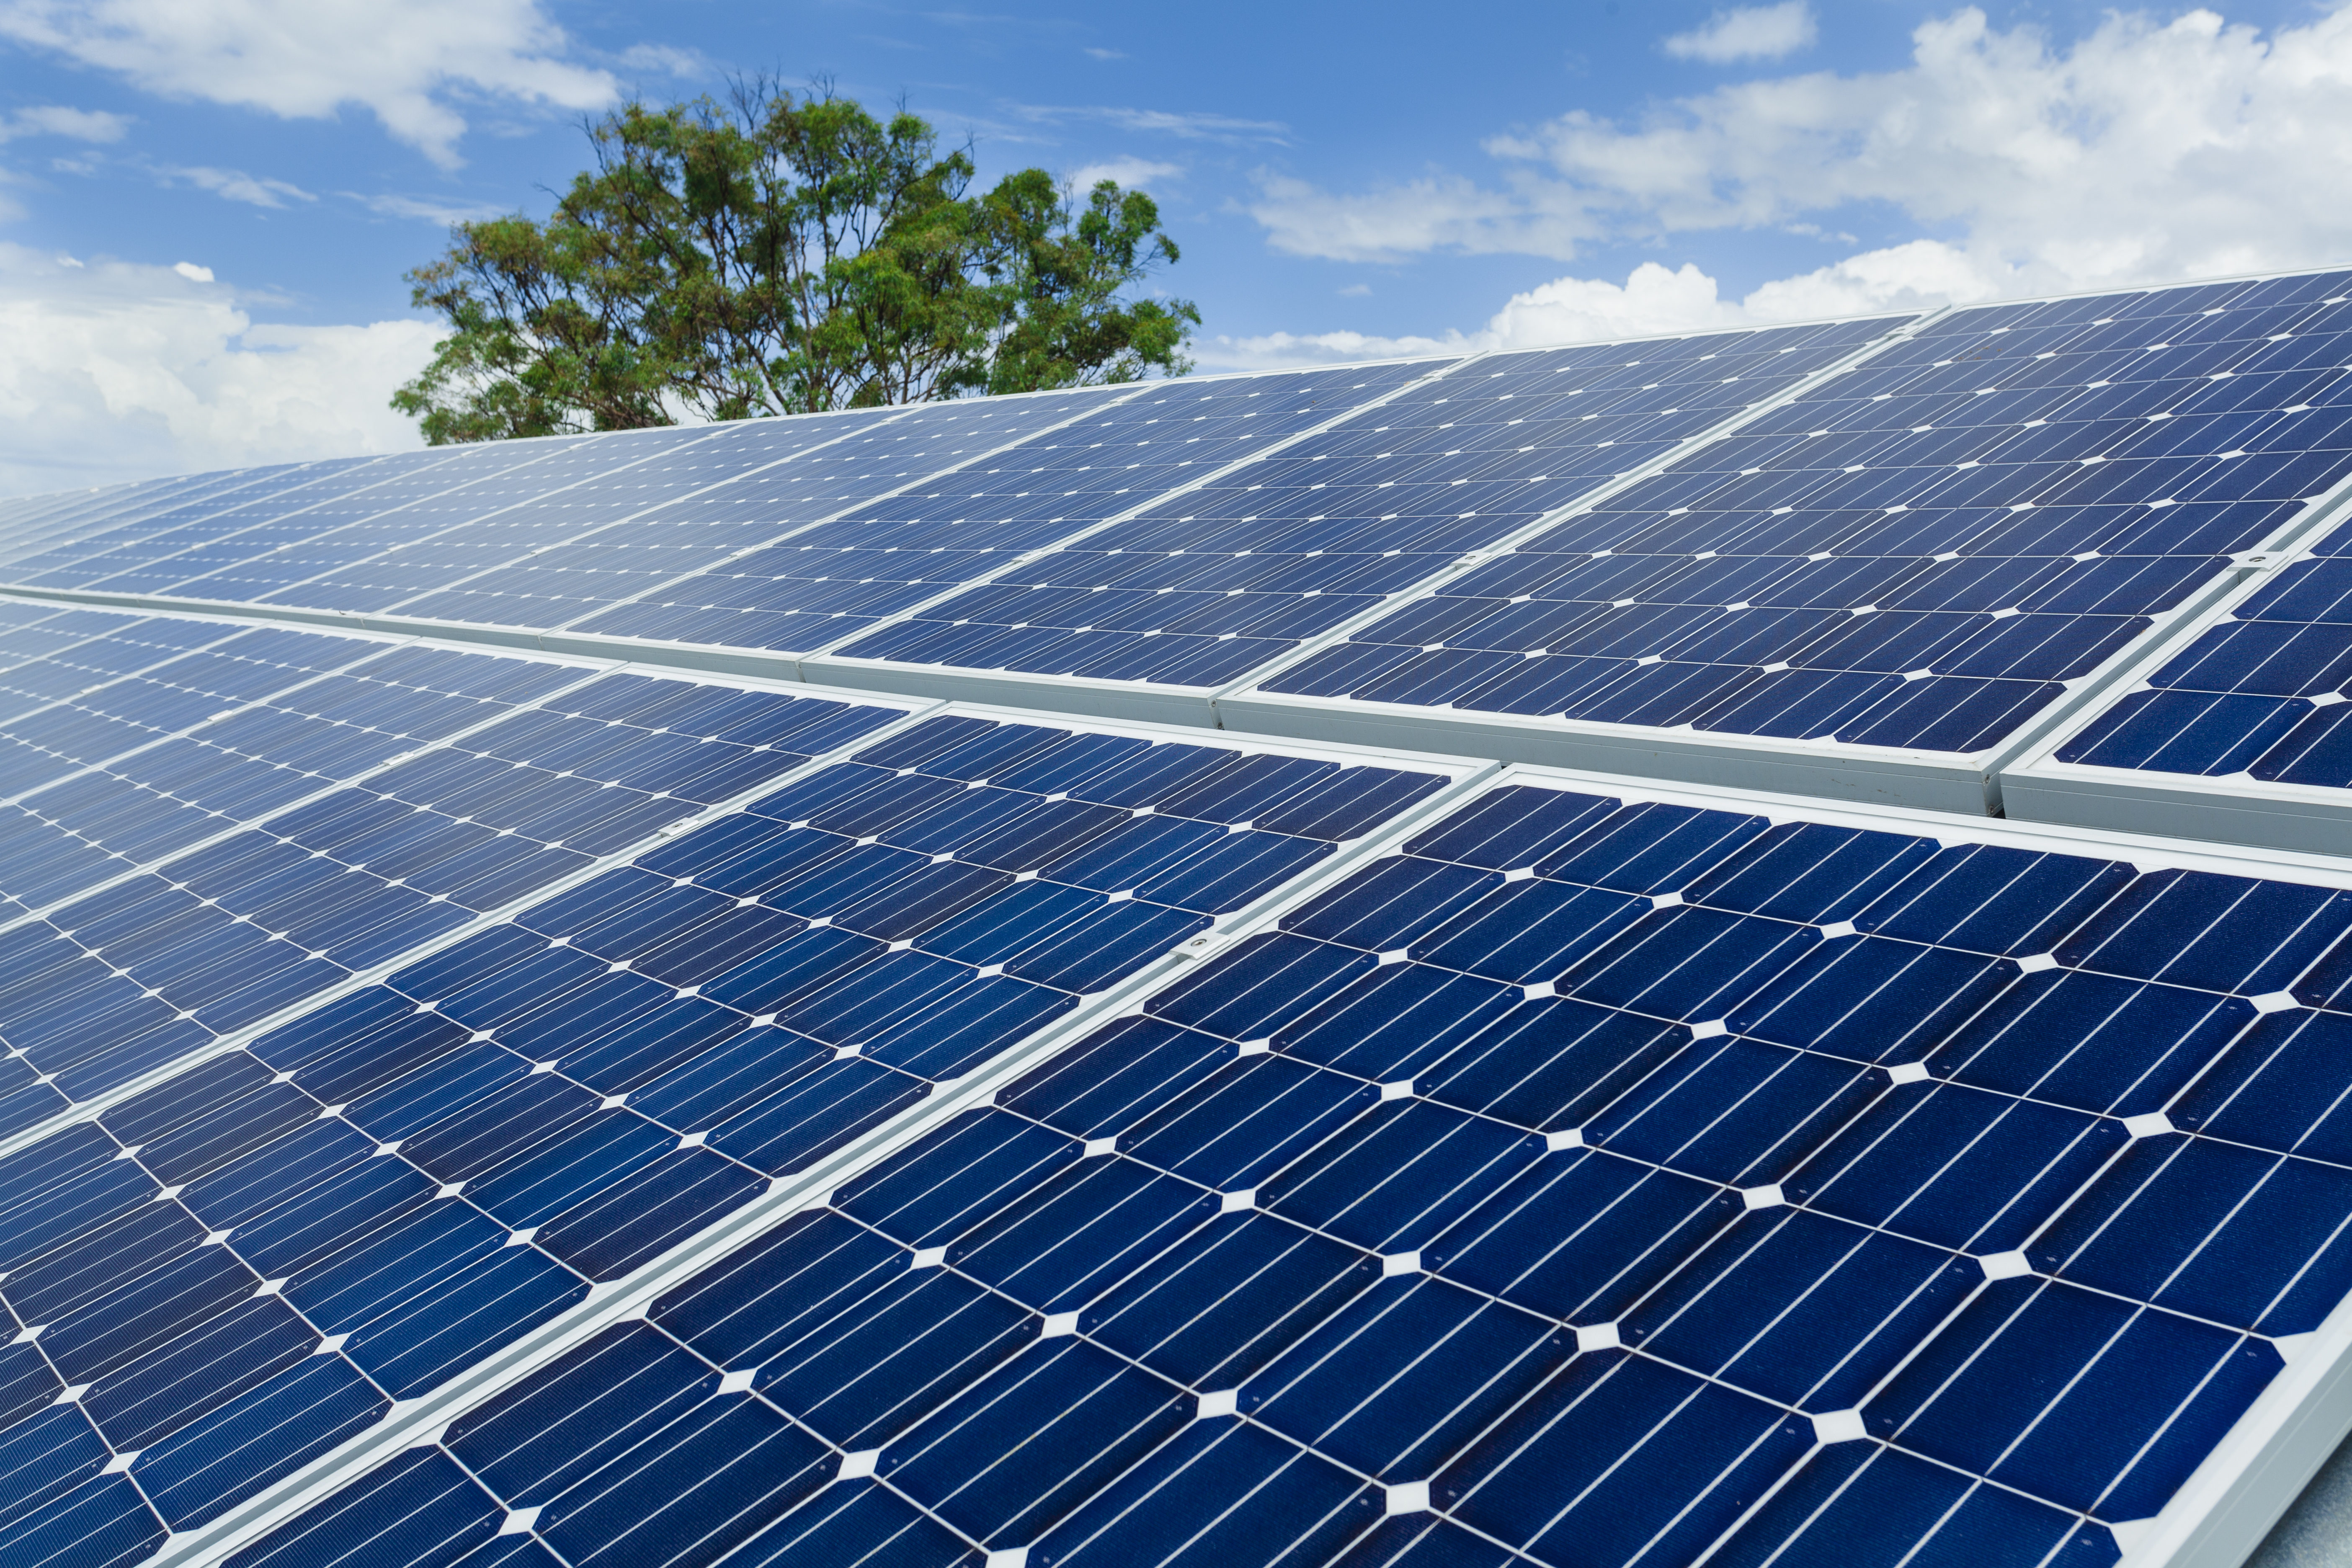 Cuba To Assist Jamaica With The Construction Of A Solar Panel Factory